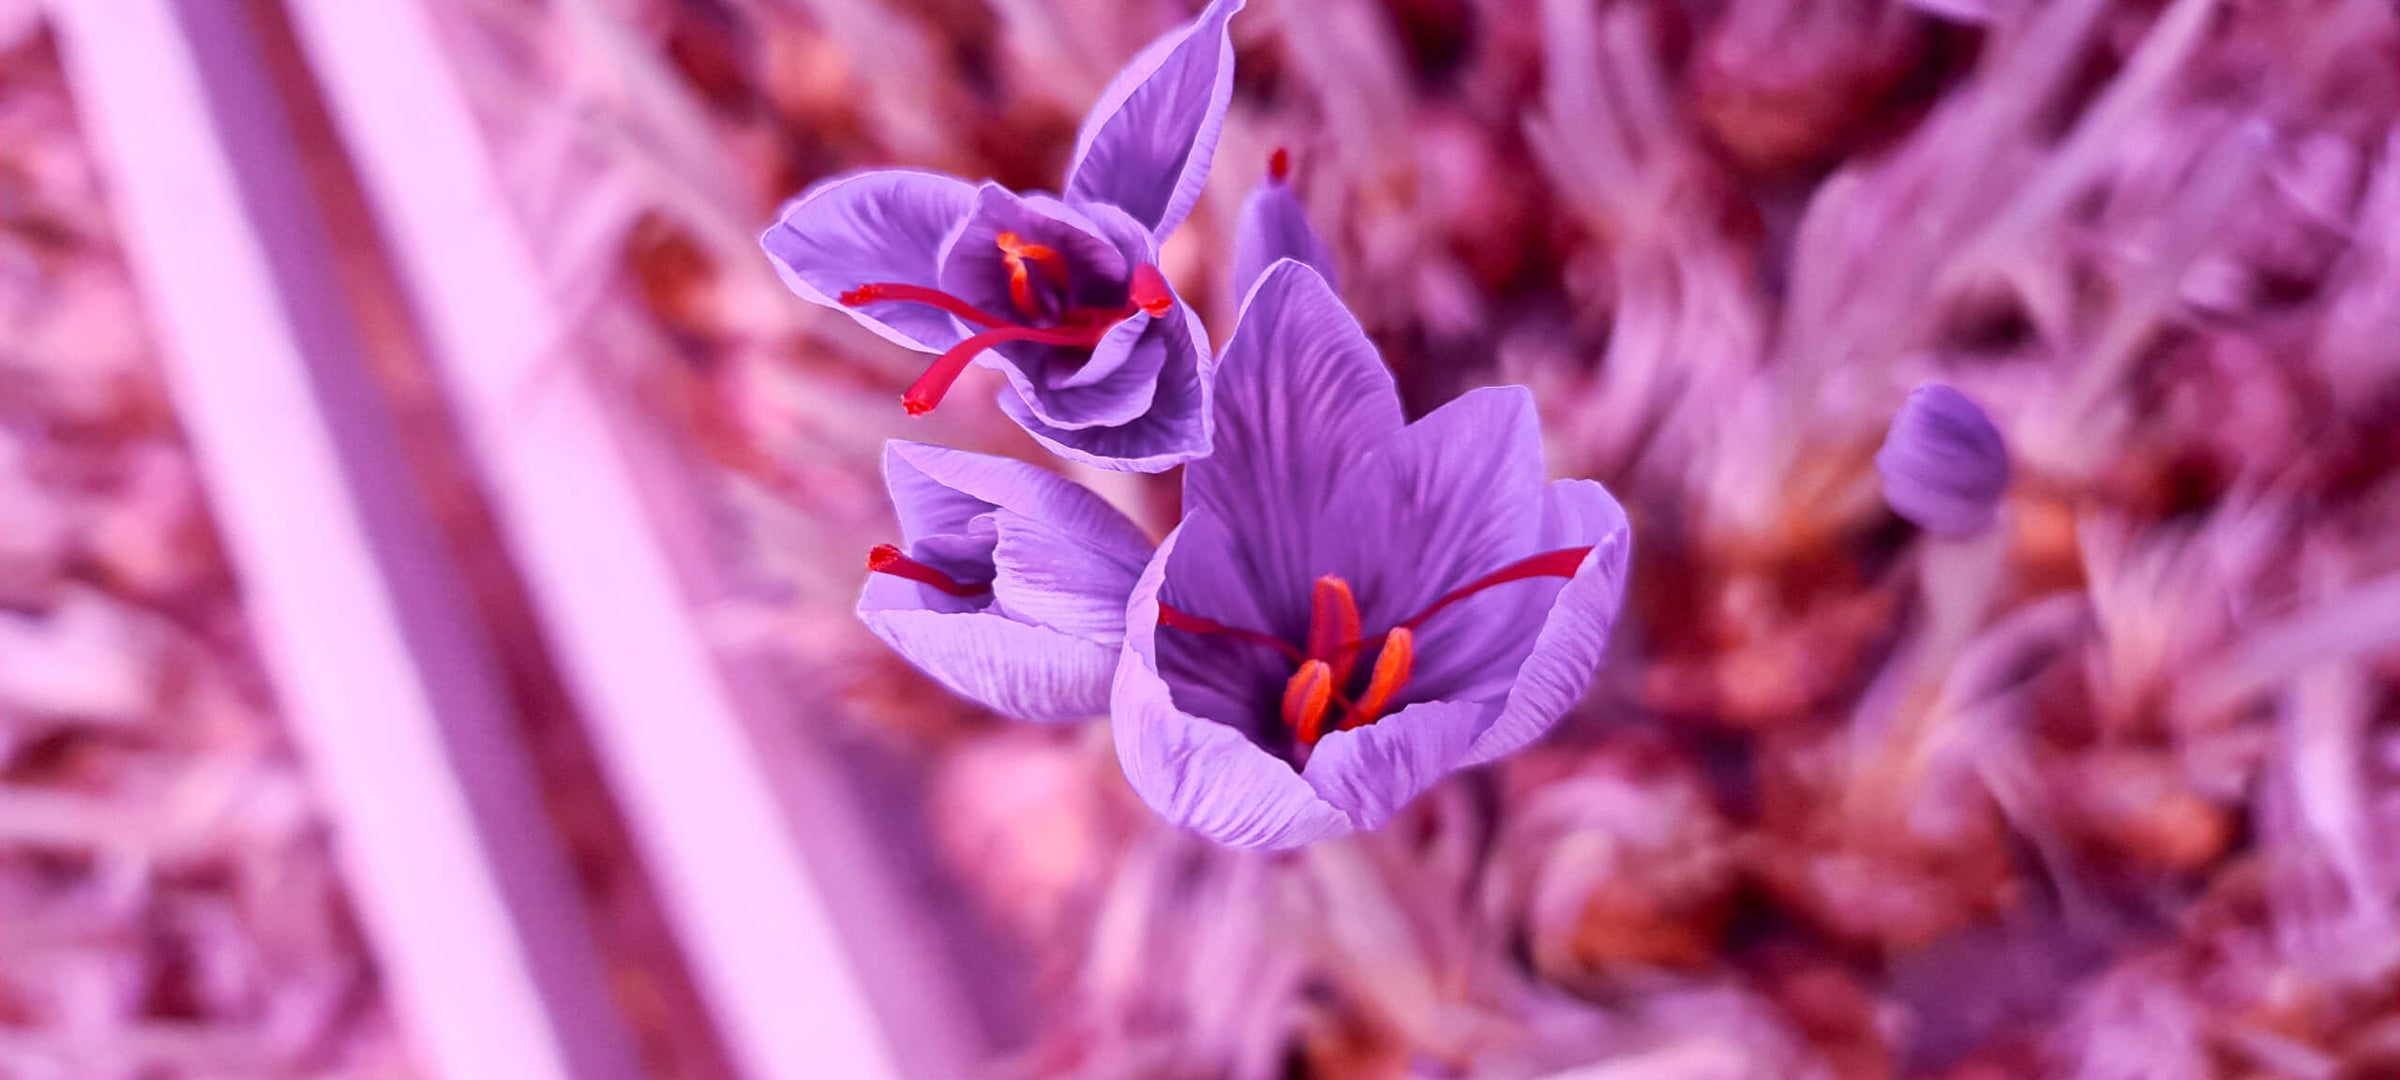 Swedish Saffron grown in a controlled environment for premium quality